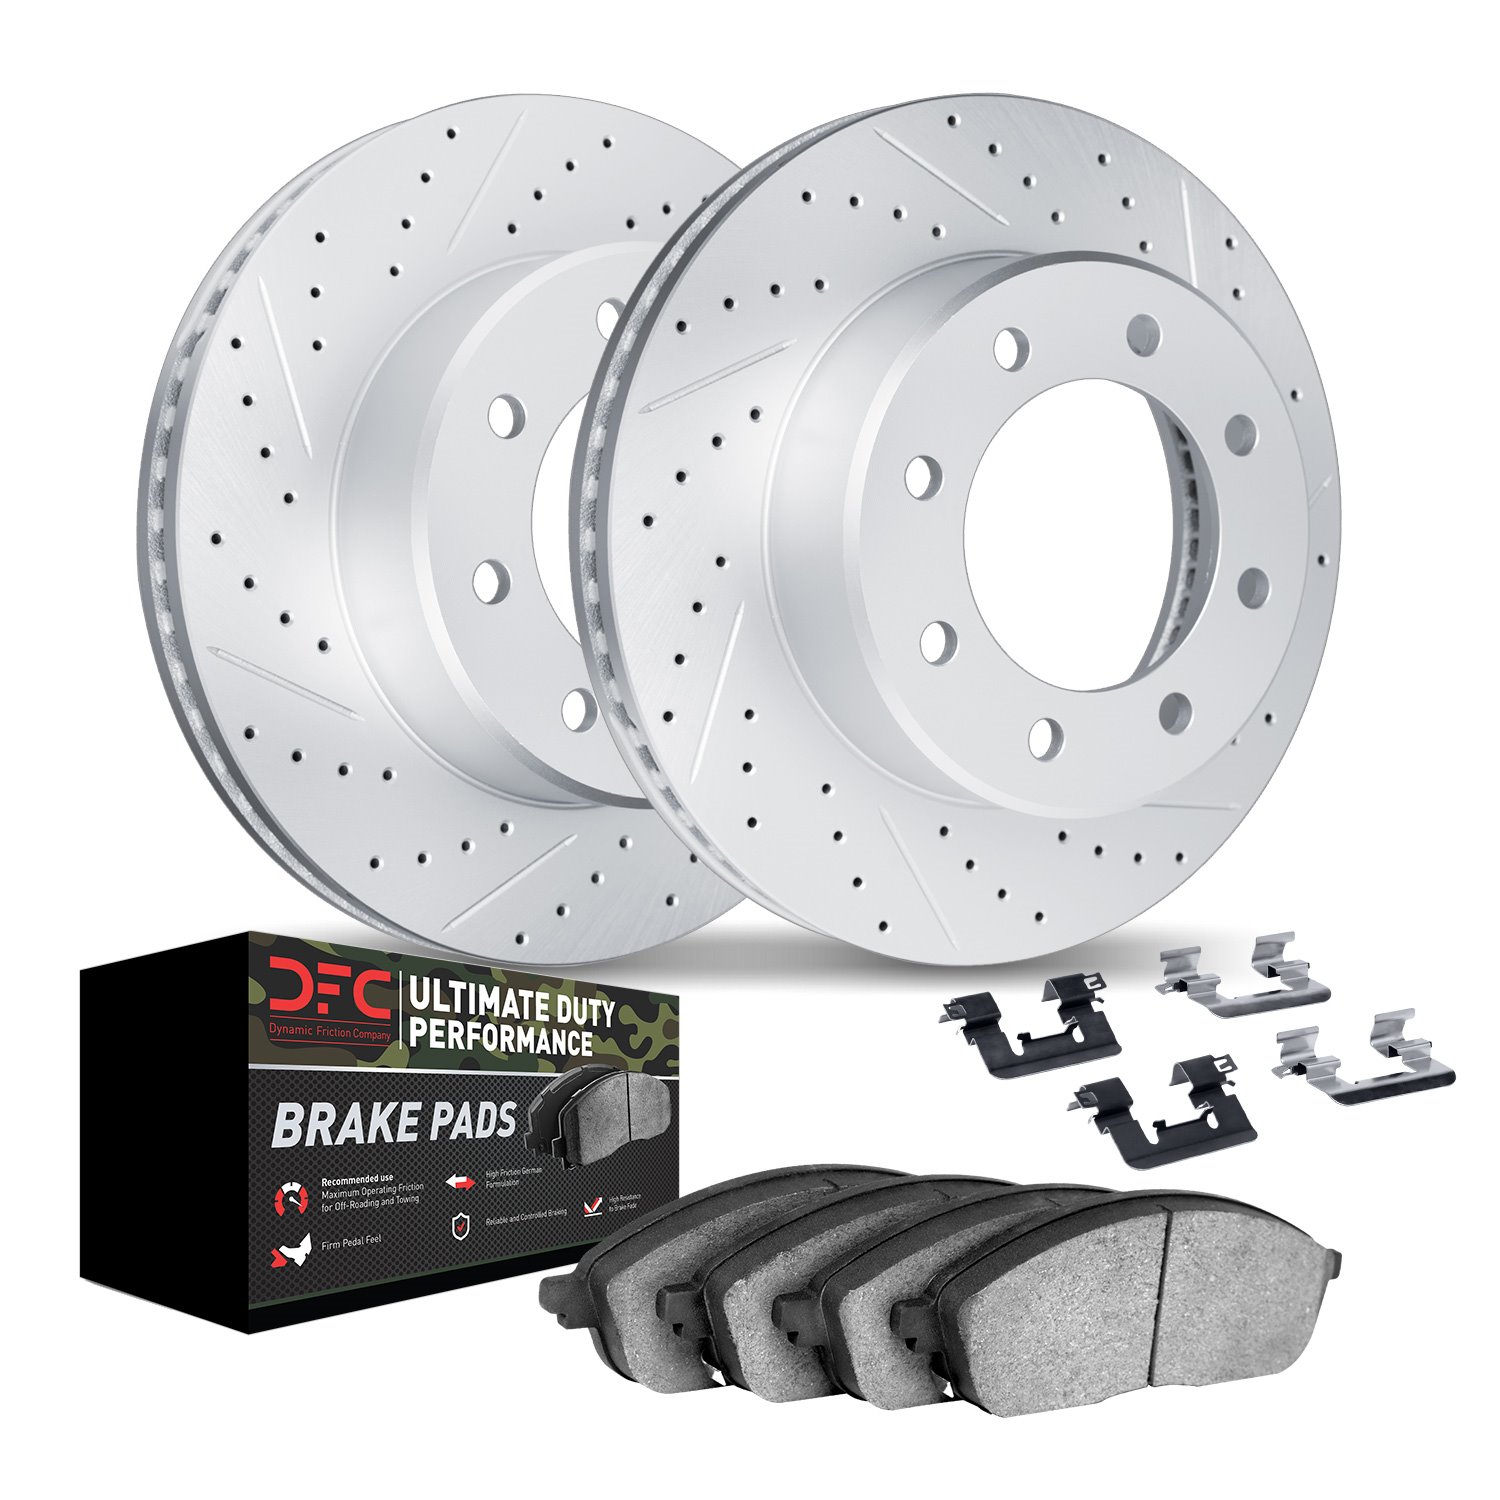 2412-48009 Geoperformance Drilled/Slotted Brake Rotors with Ultimate-Duty Brake Pads Kit & Hardware, 1992-2002 GM, Position: Fro